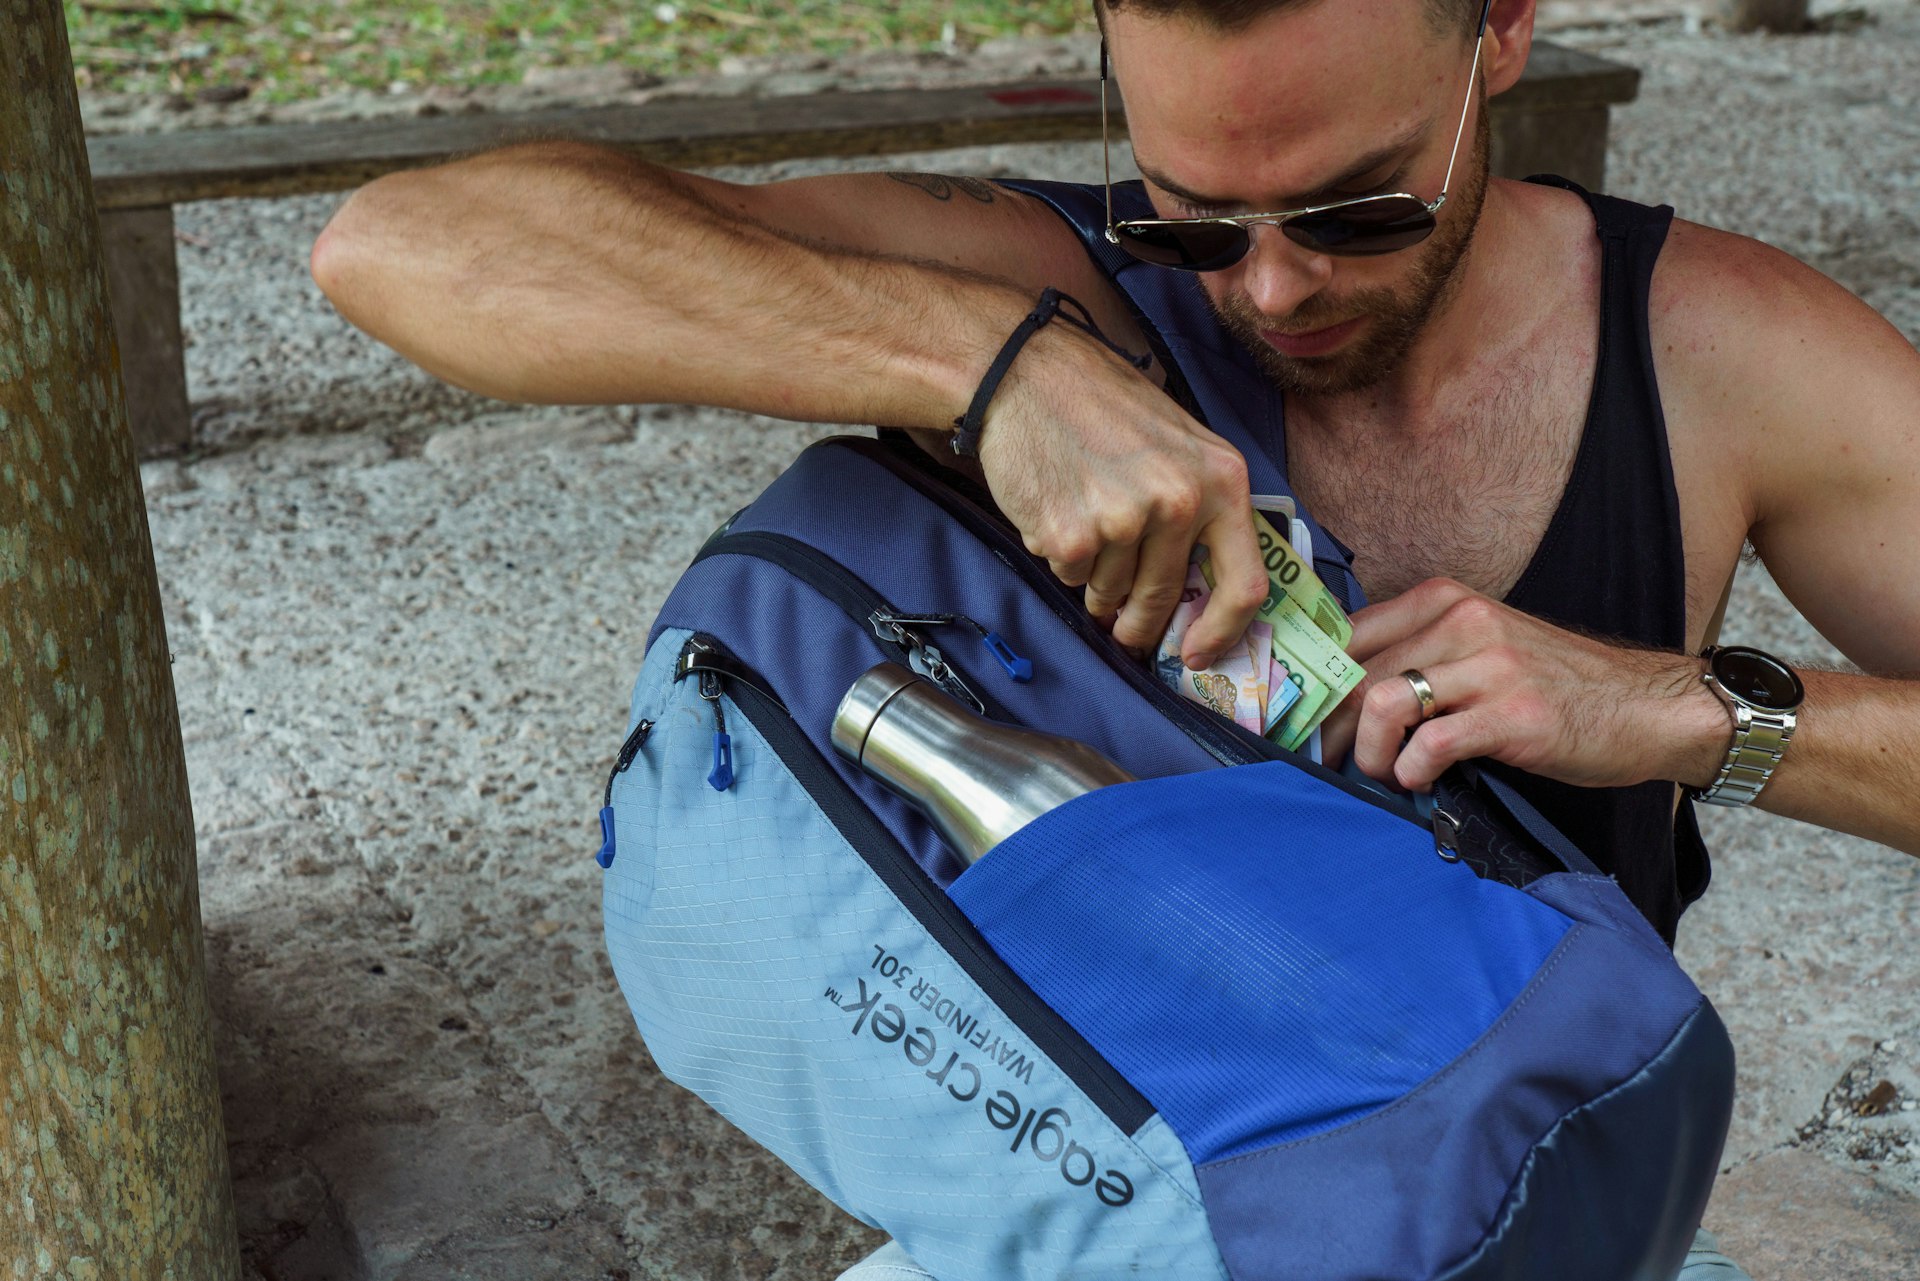 A man extracts cash and a passport from a secret compartment in his backpack